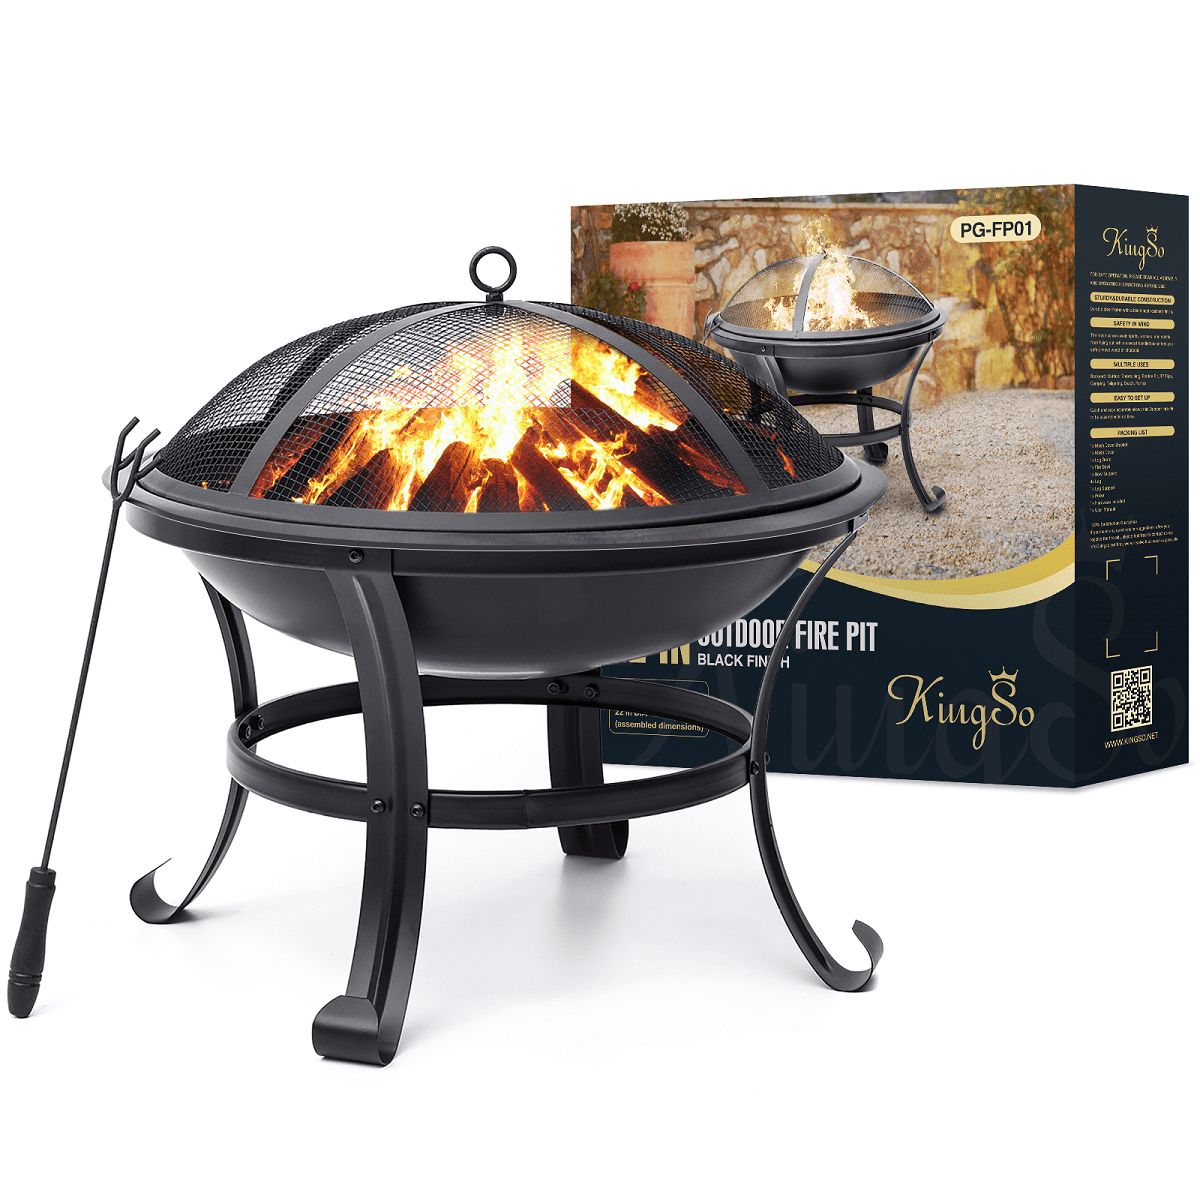 Steel Chiminea Fire Pit Outdoor Garden Patio Heater BBQ Charcoal Black Gold 